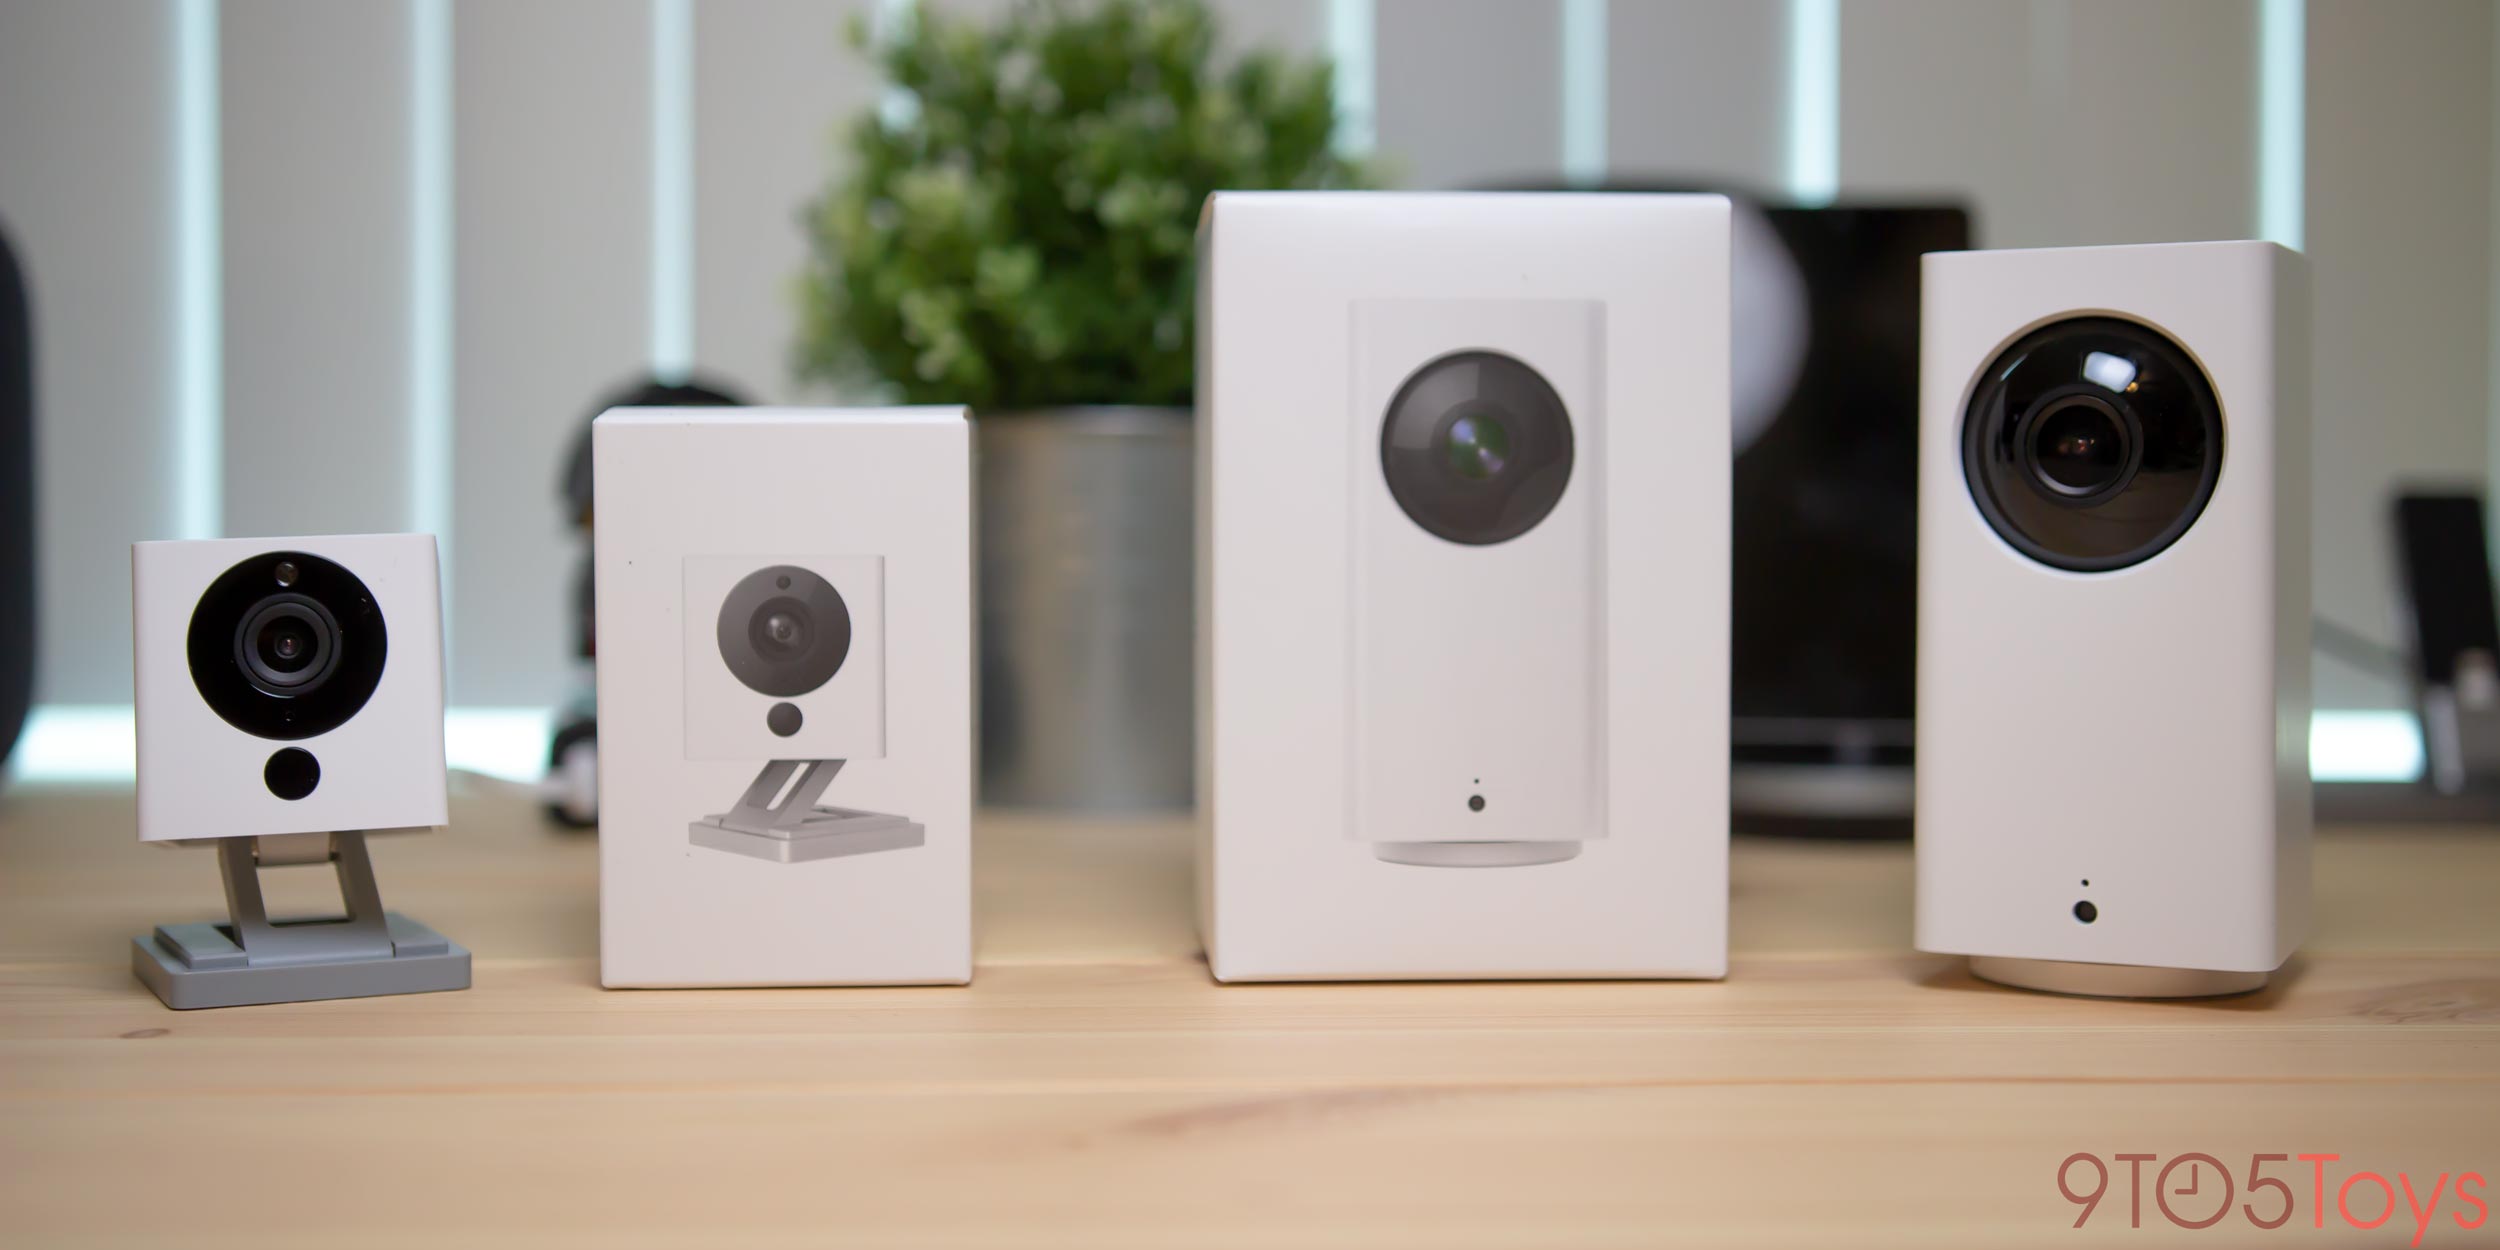 Wyze Cam picks up Alexacompatibility in latest update, ask Echo to